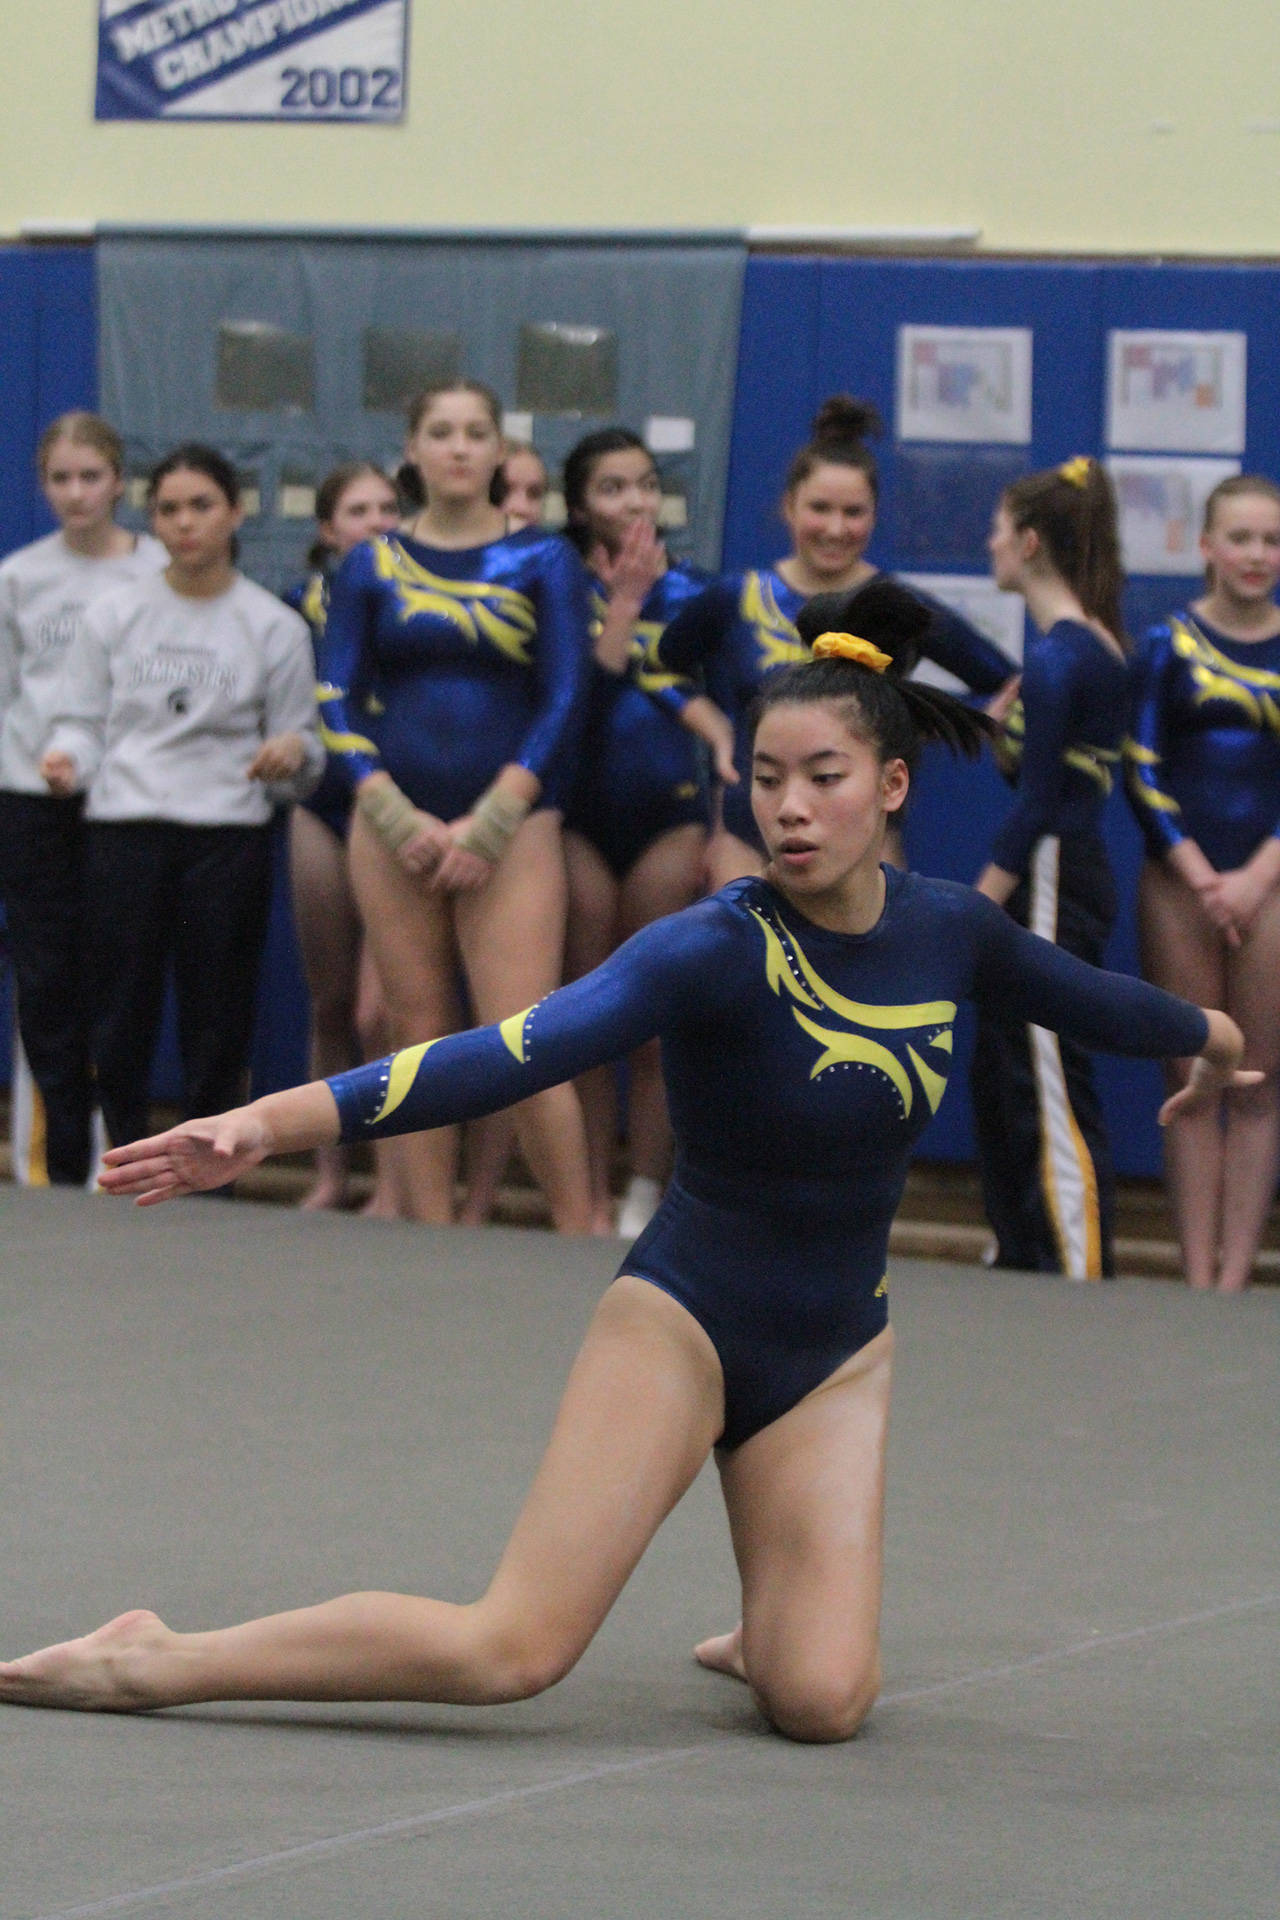 Katharine Cooper, shown here competing on floor during the Senior Night meet at Bainbridge High, has qualified for the state 3A championships. (Brian Kelly | Bainbridge Island Review)